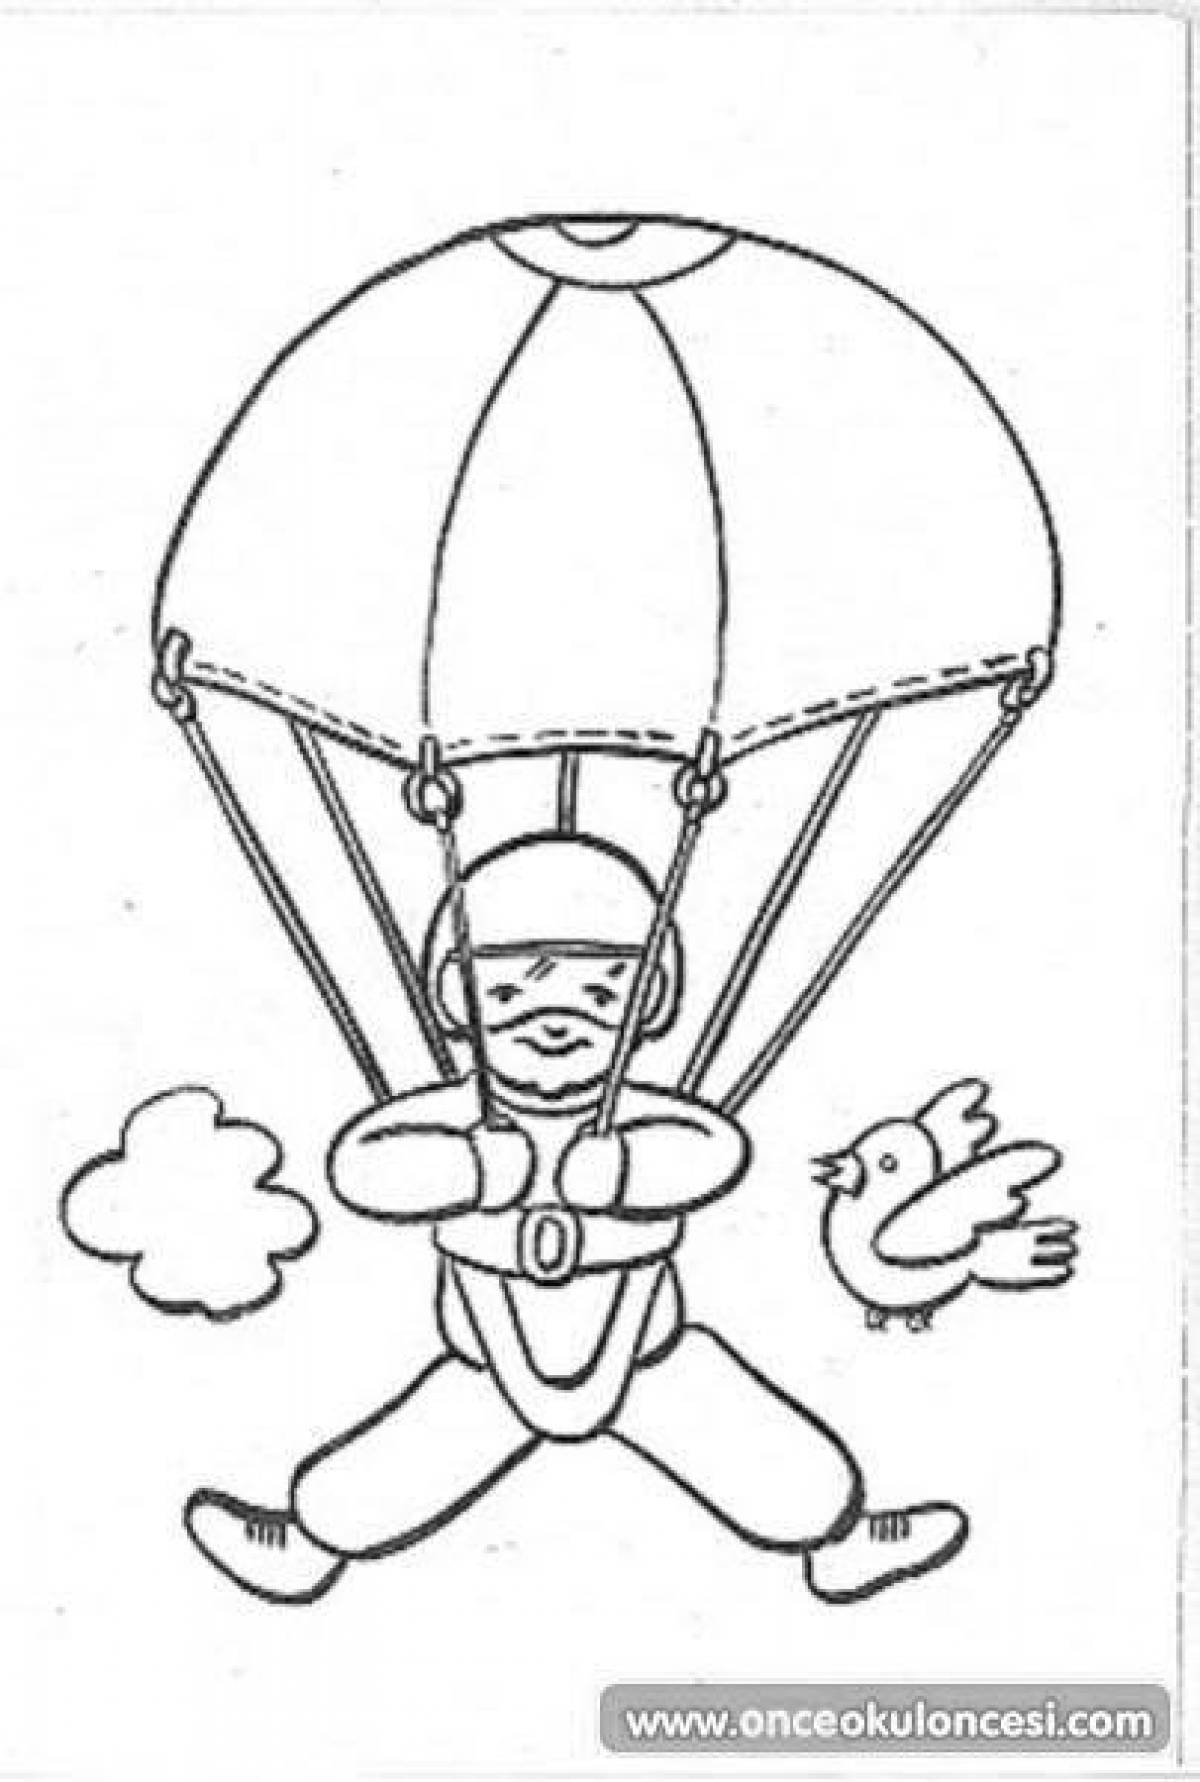 Great paratrooper coloring book